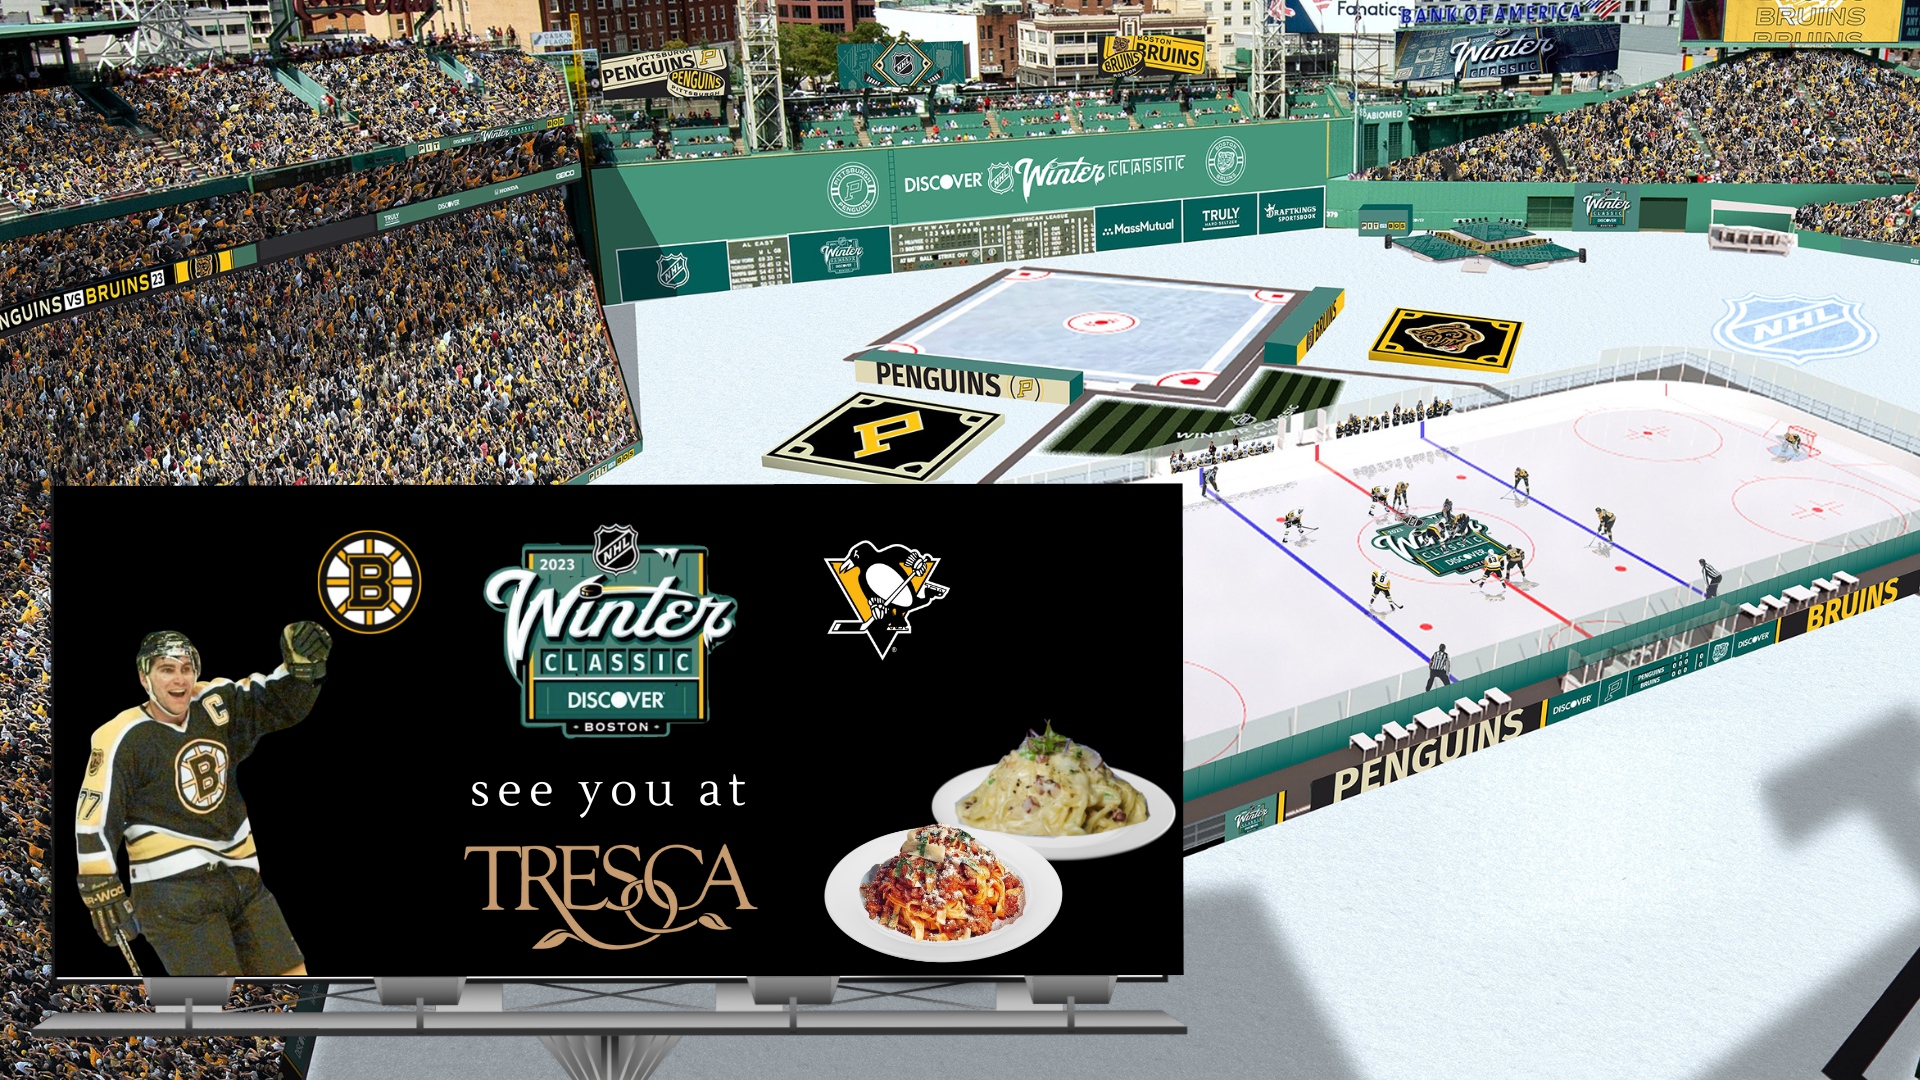 The 2022 Winter Classic - We Were Made For This 